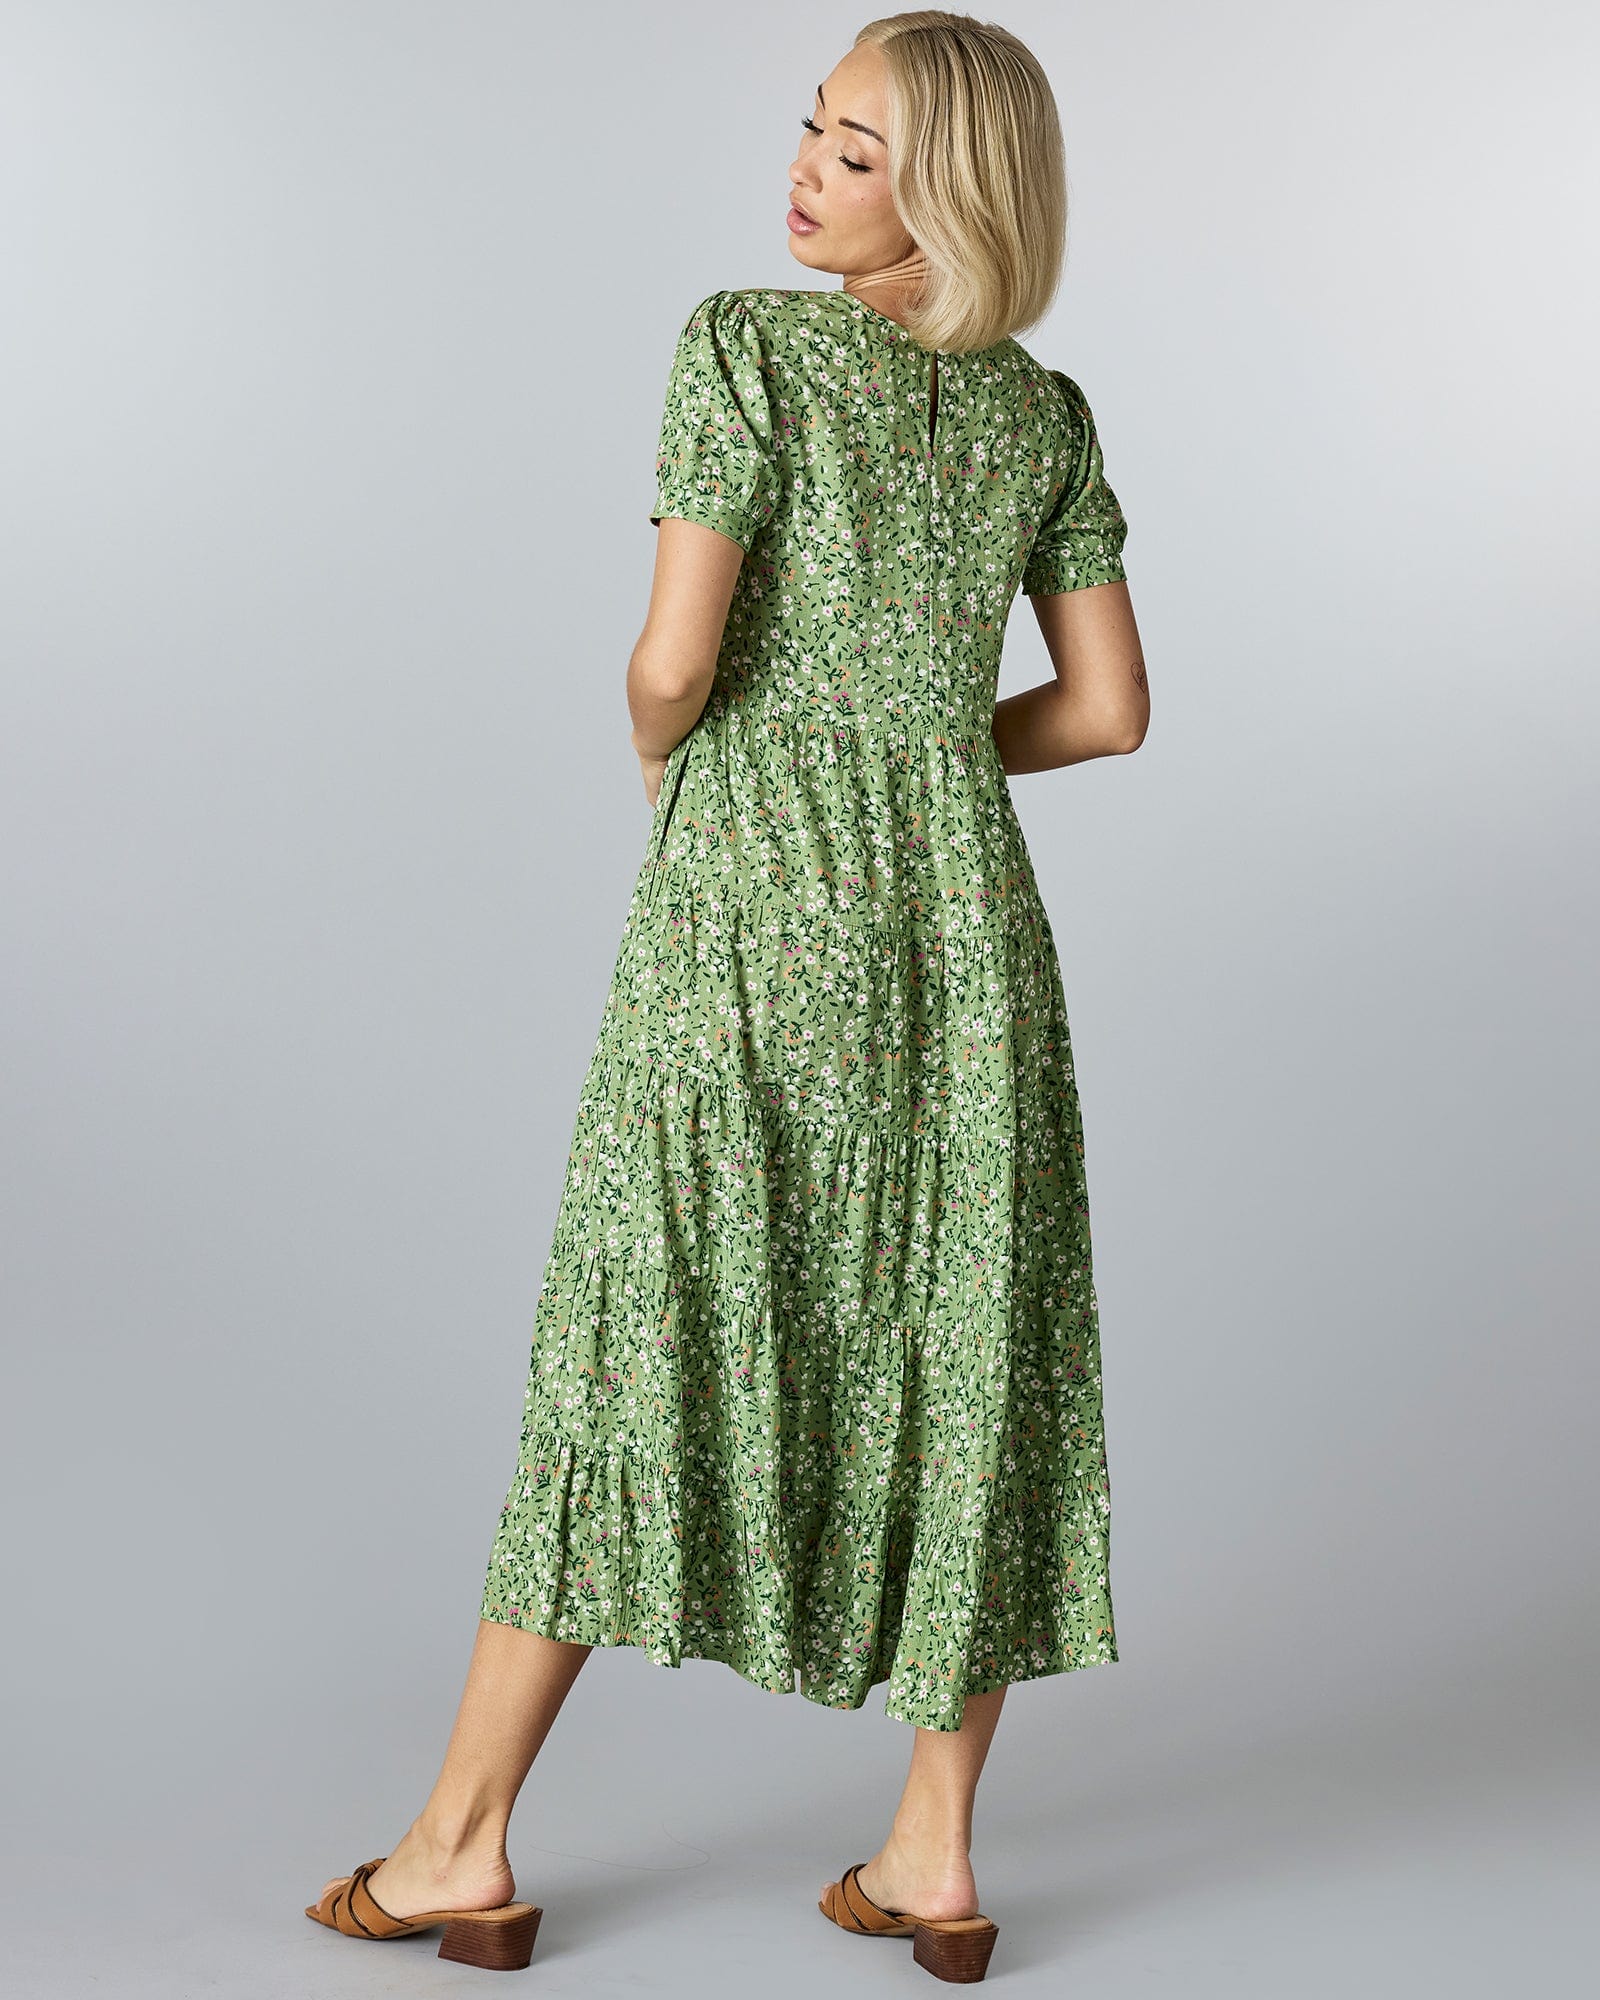 Woman in a green floral dress that has short sleeves and tiers down the skirt.